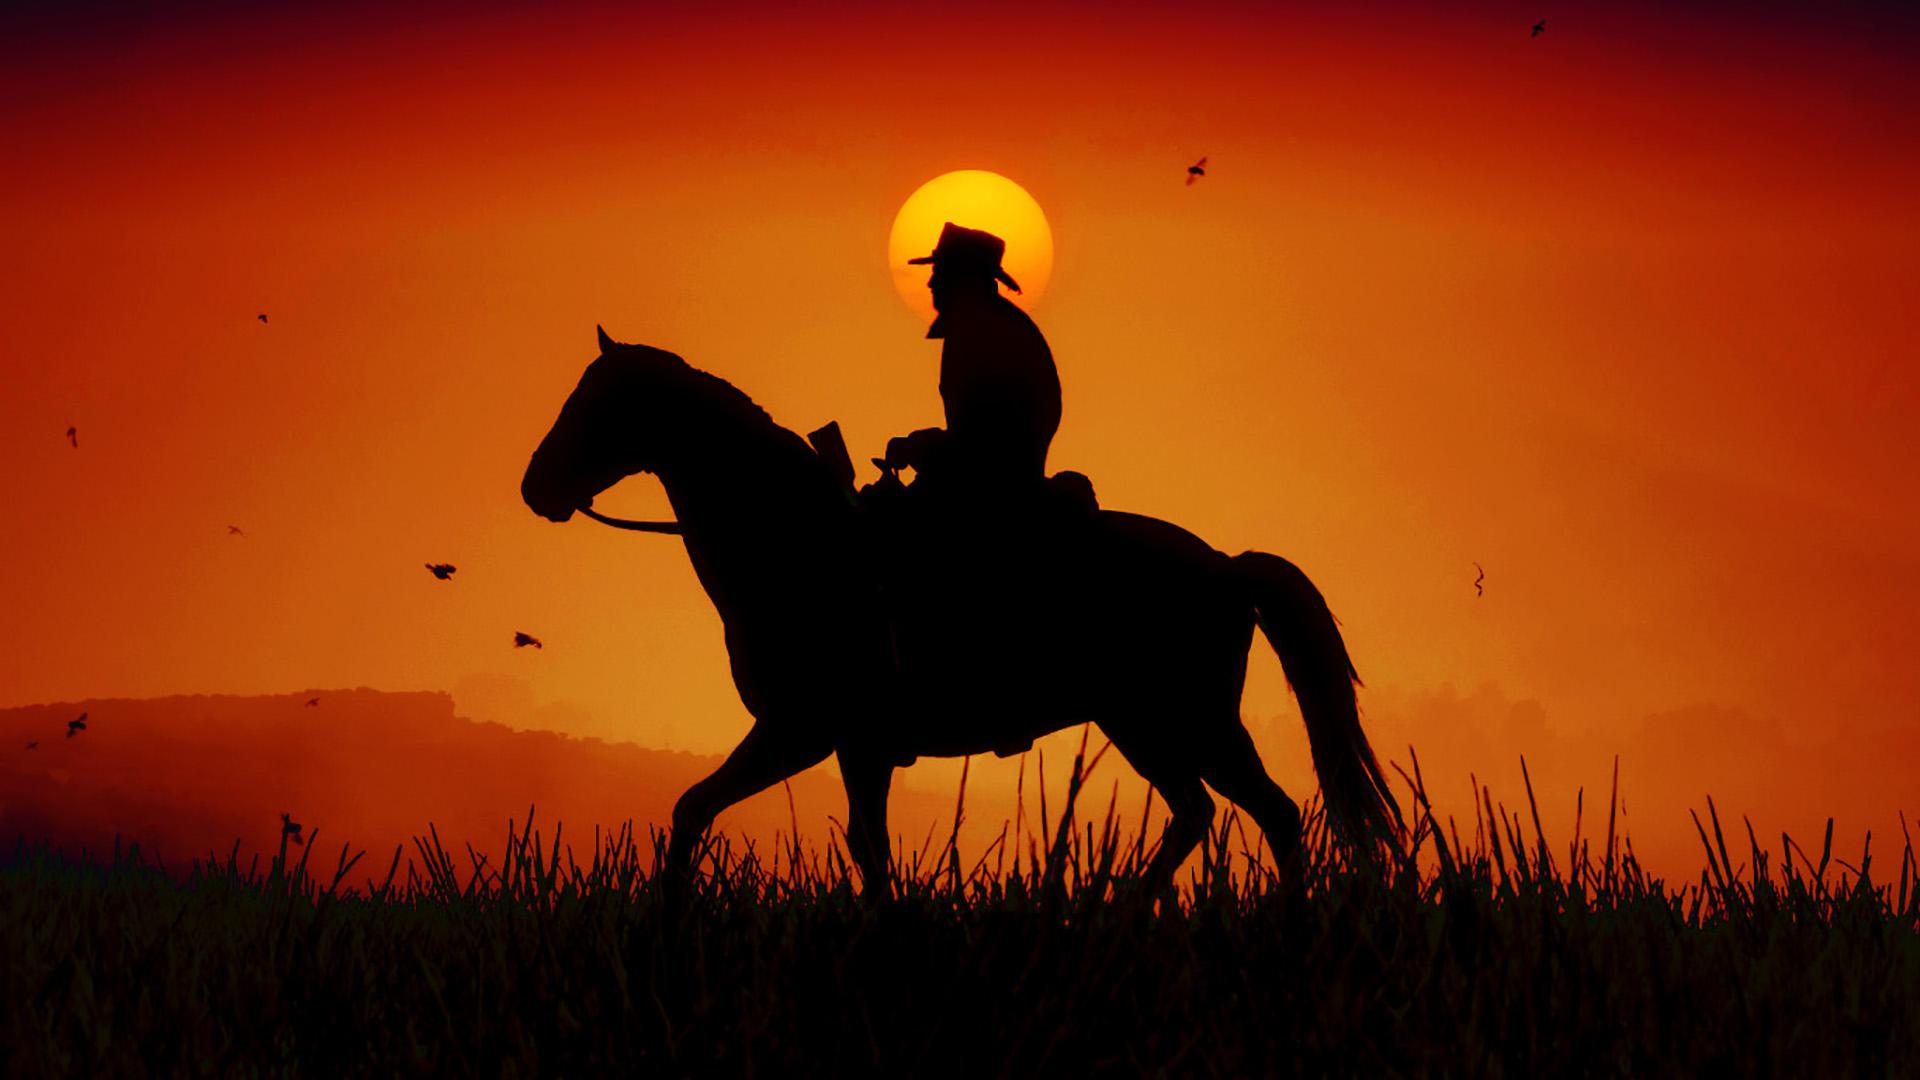 Wallpaper of Cowboy, Horse, Silhouette, Western, RDR2